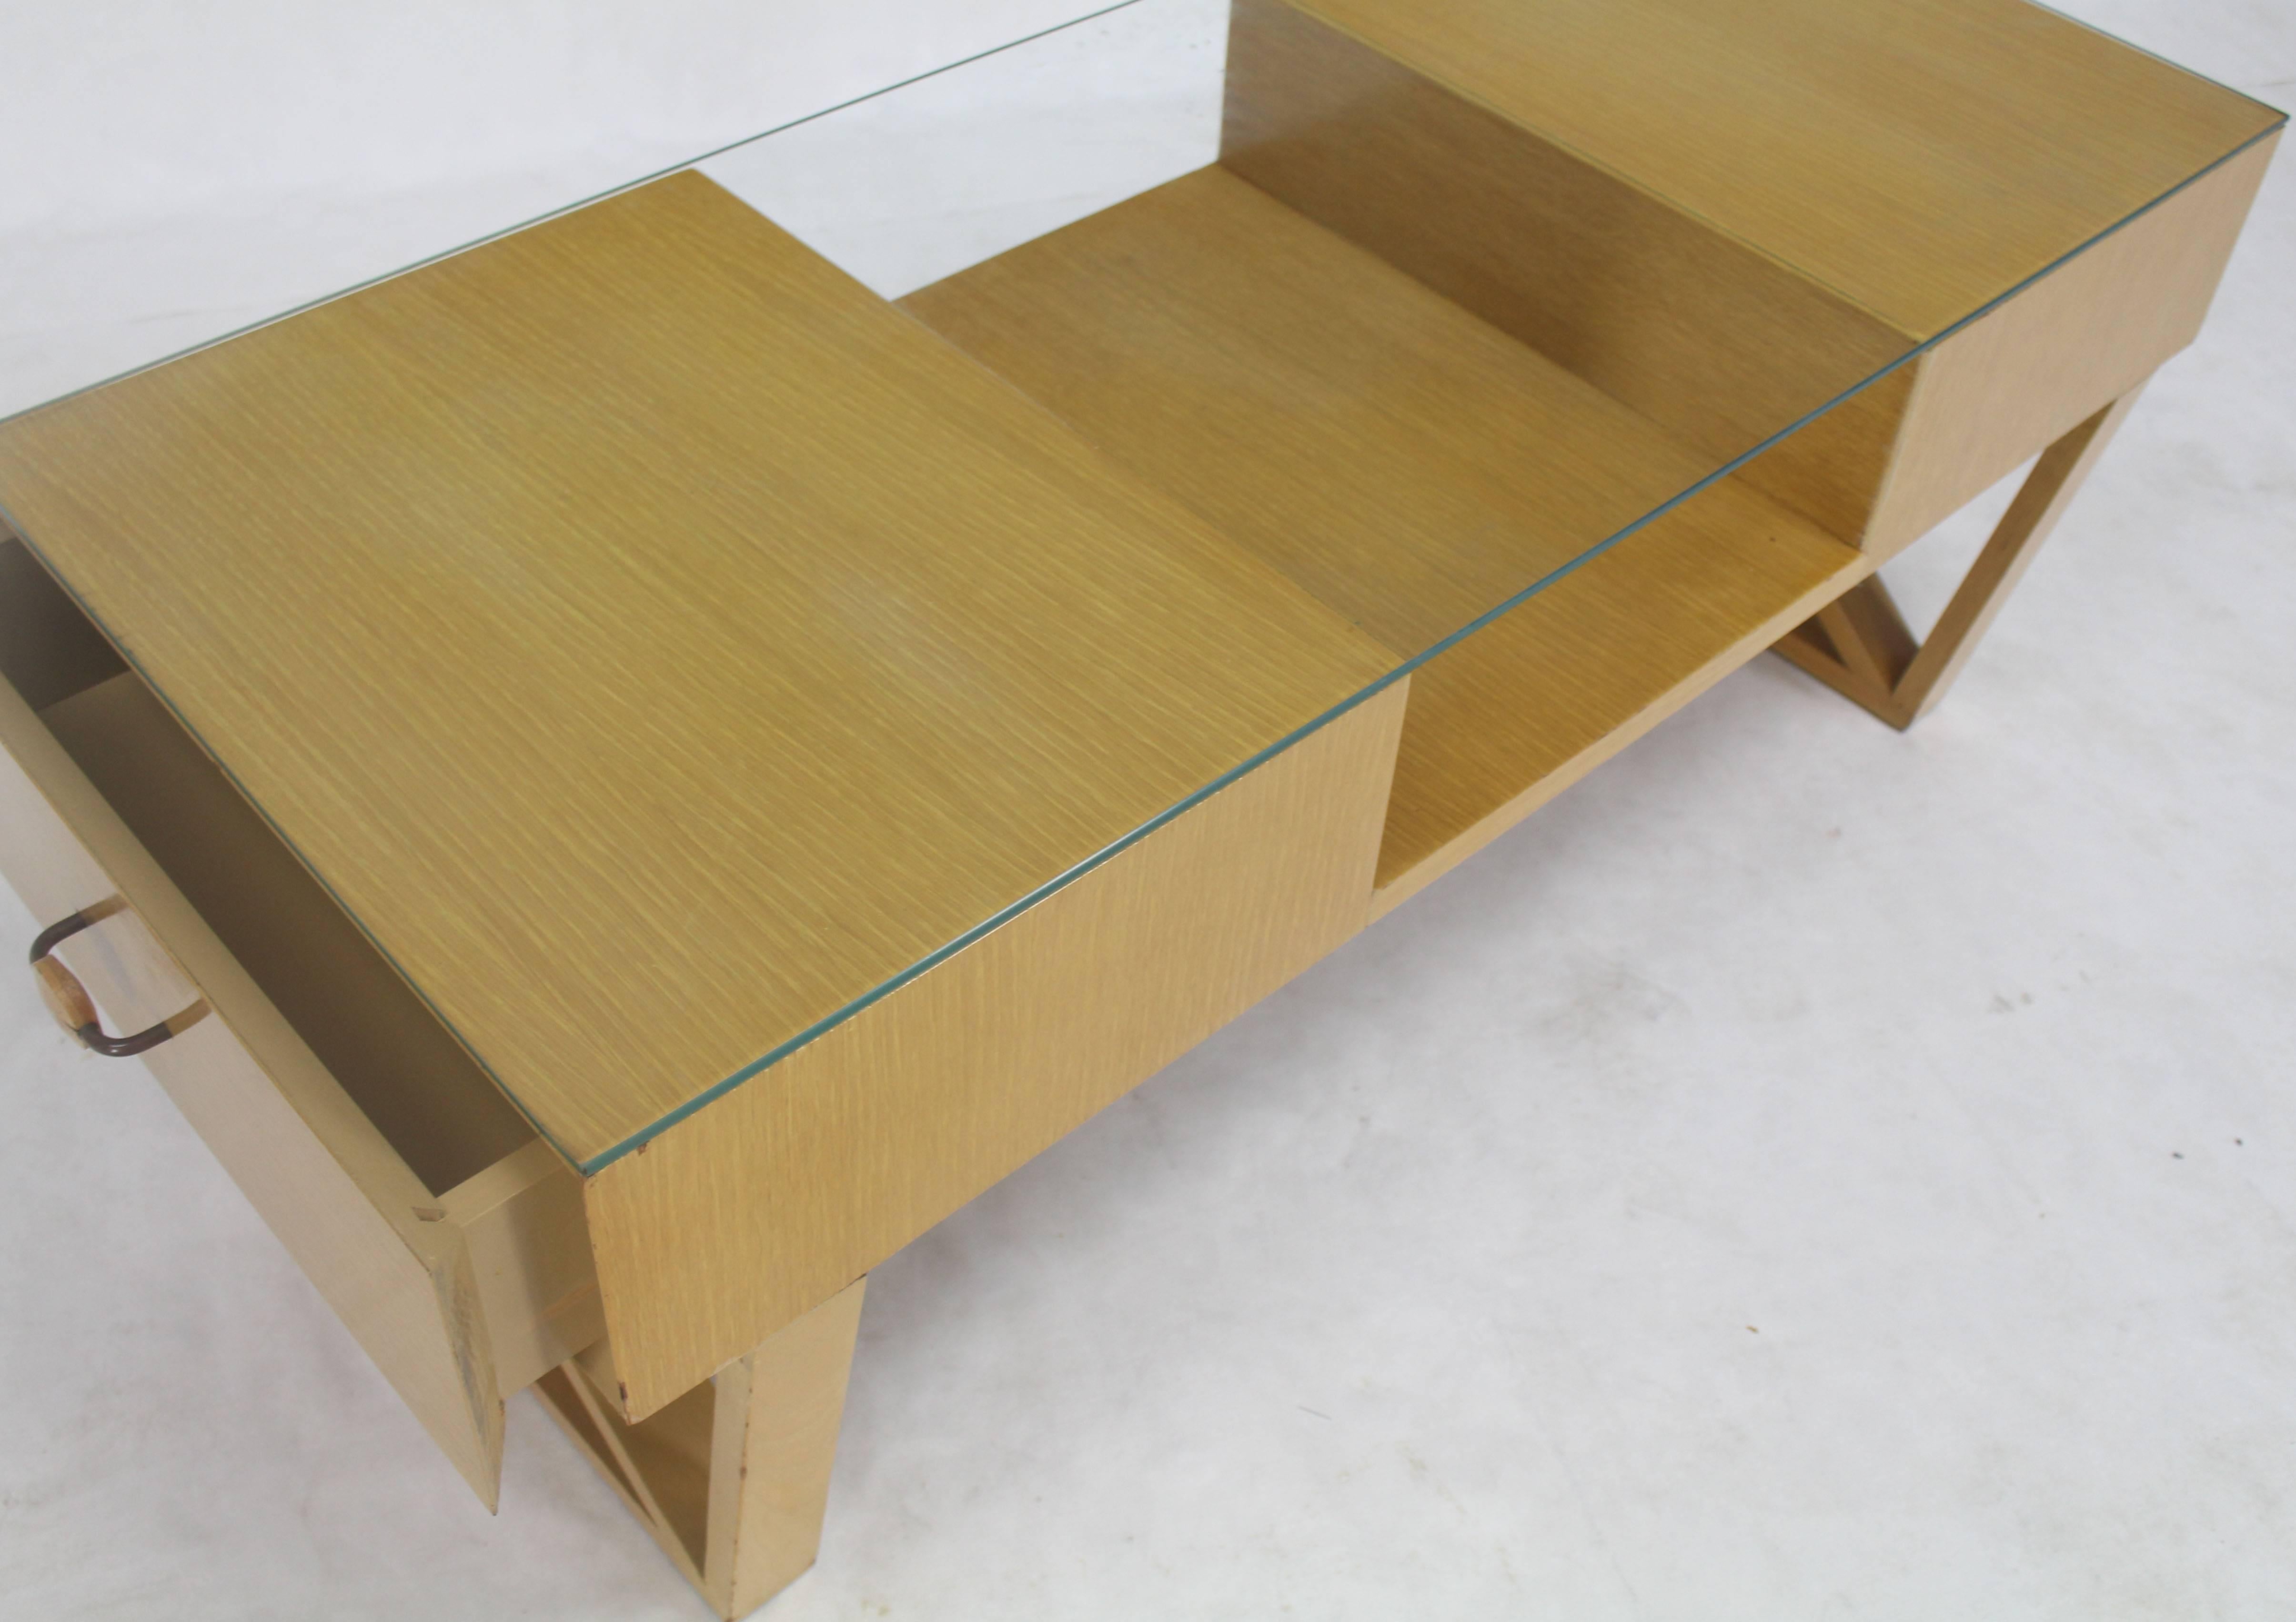 Mid-Century Modern circa 1950 glass top X-base coffee table with shelf and two-drawer storage compartments. Excellent vintage condition.